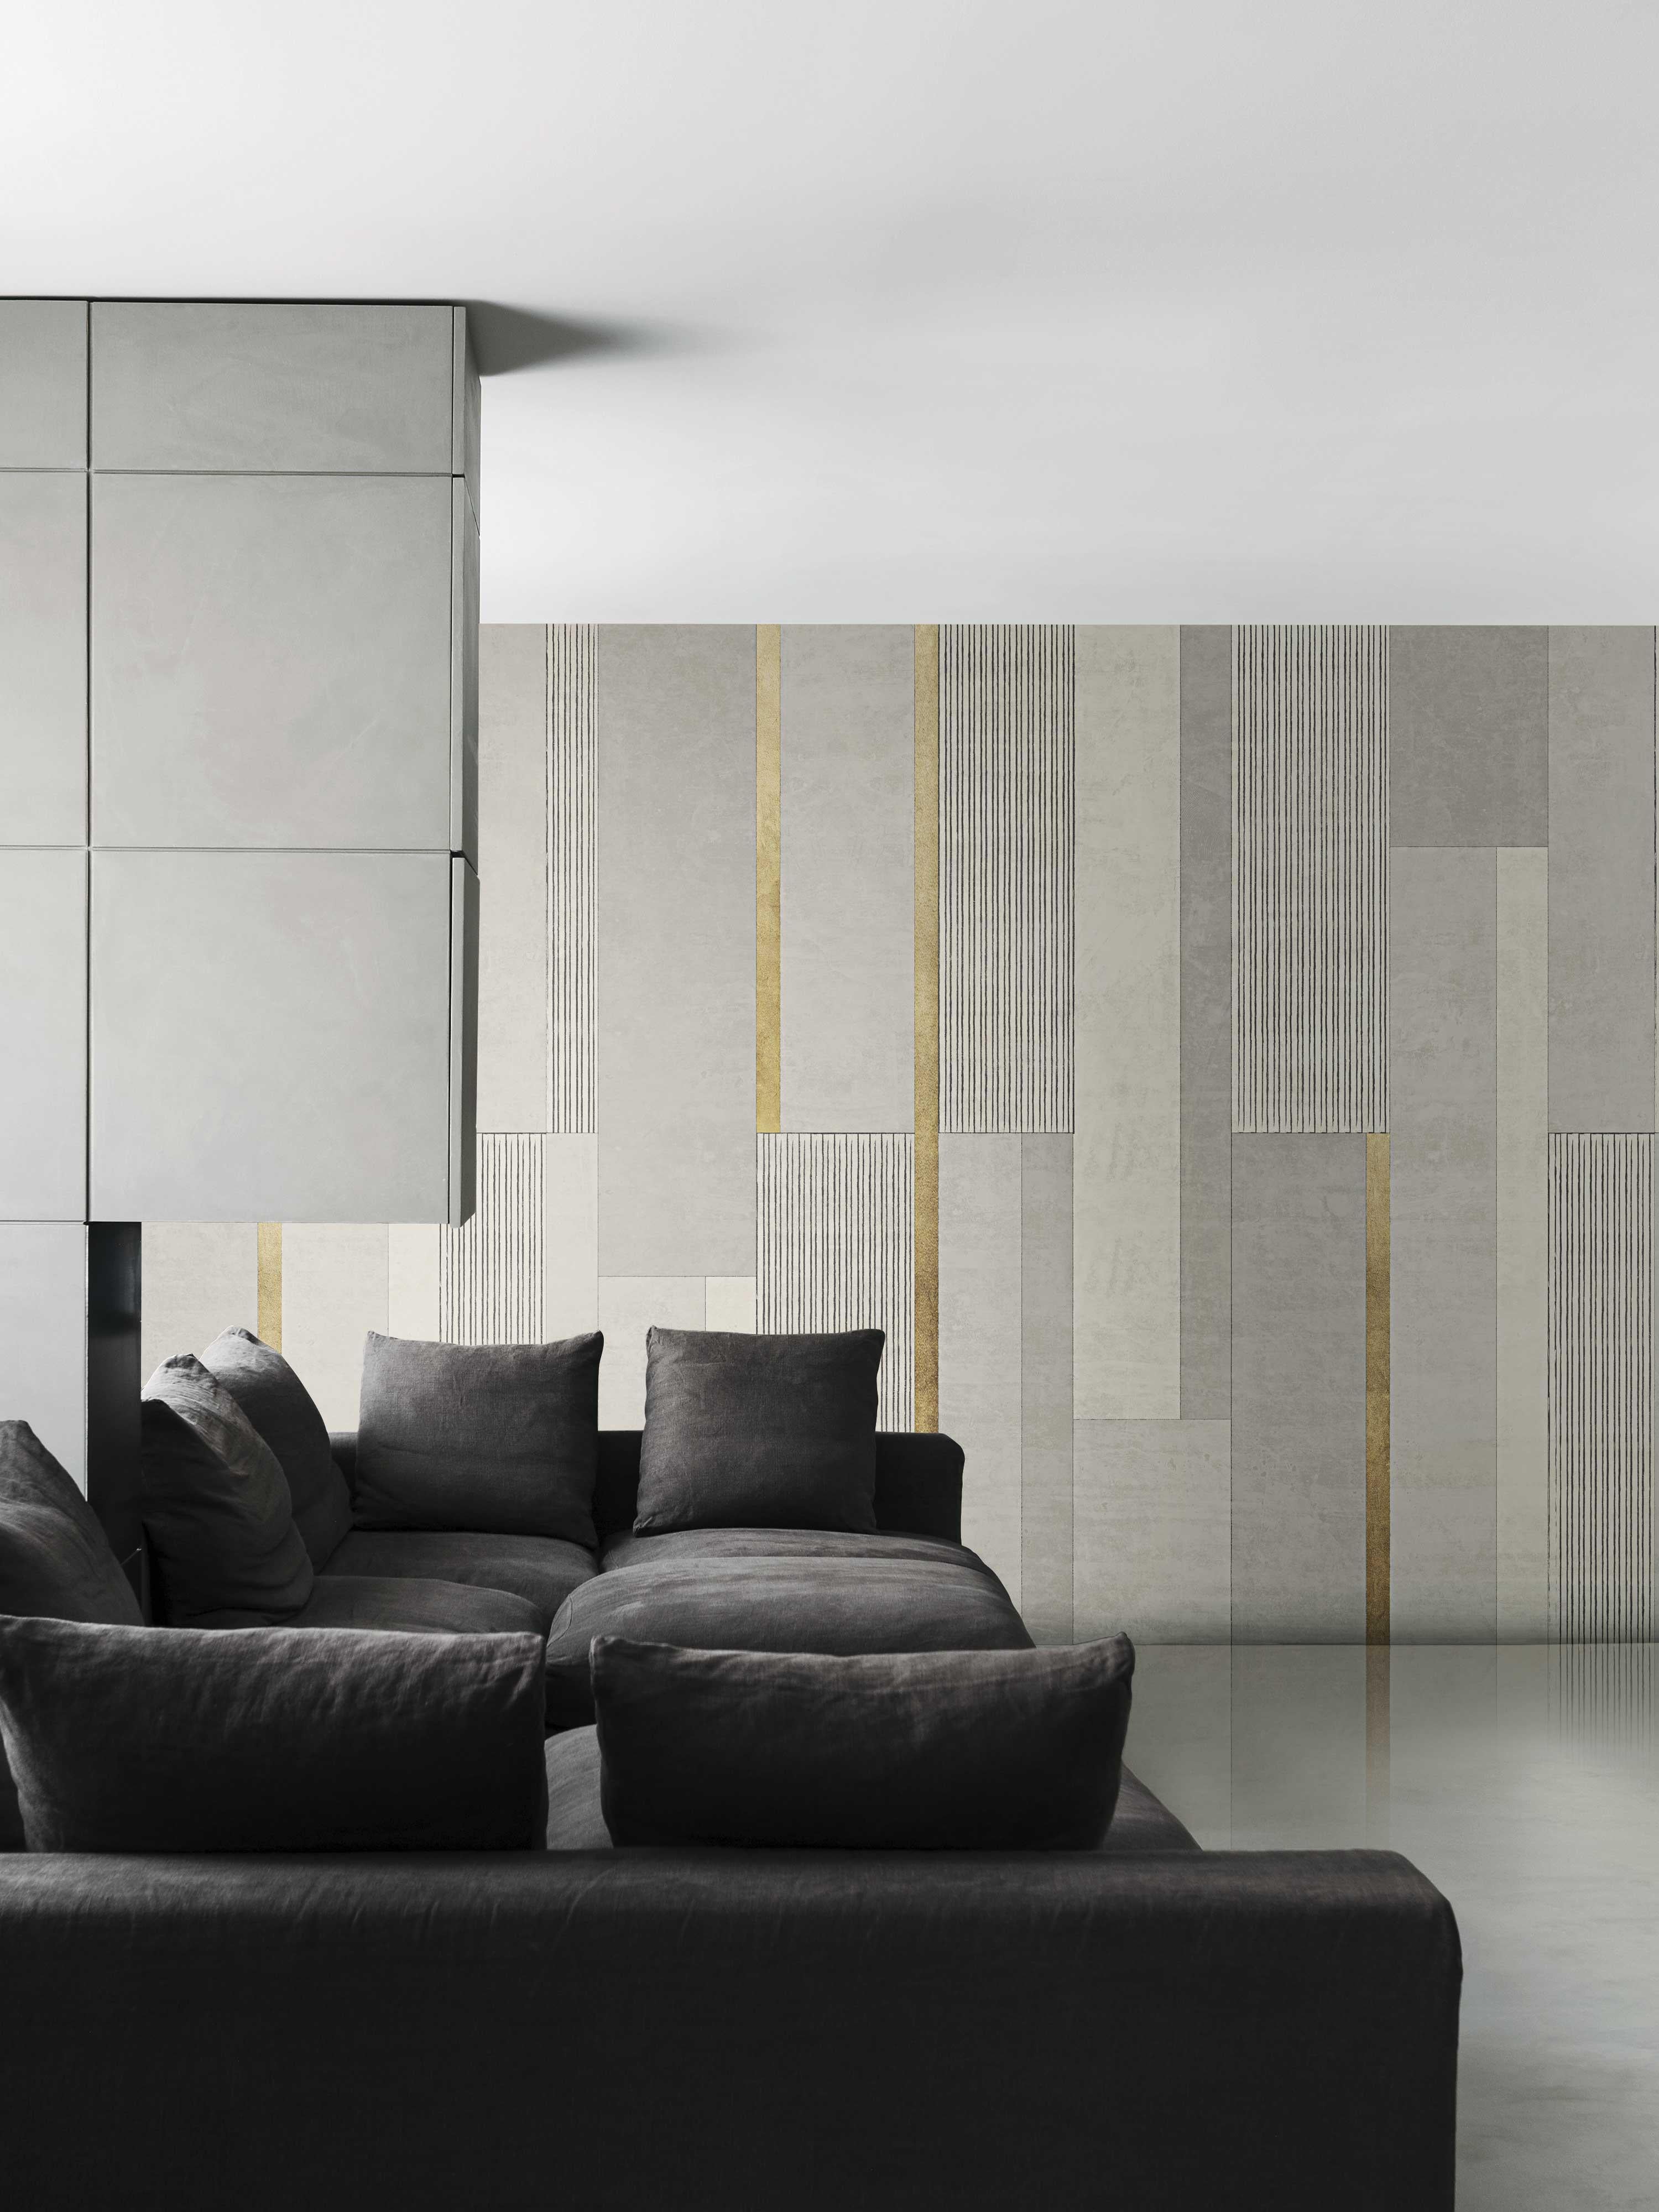 Available in pearl grey, this wallpaper, composed of vertical elements of different materials, is extremely sober and elegant and fits perfectly in any type of context. Measure: 500x310 cm.